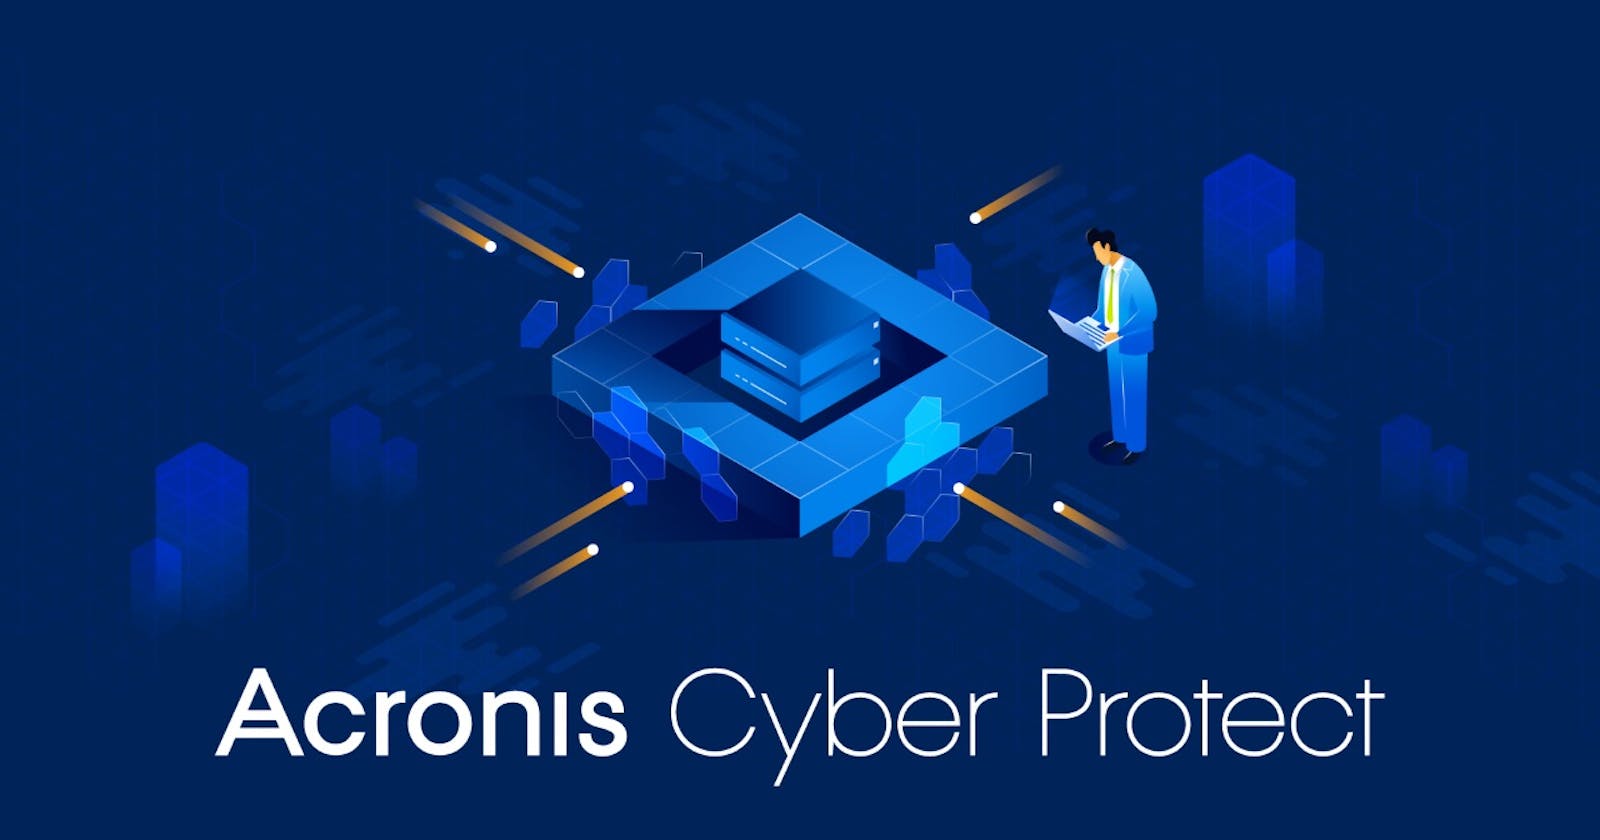 Acronis: A Pioneer in Cyber Protection Solutions